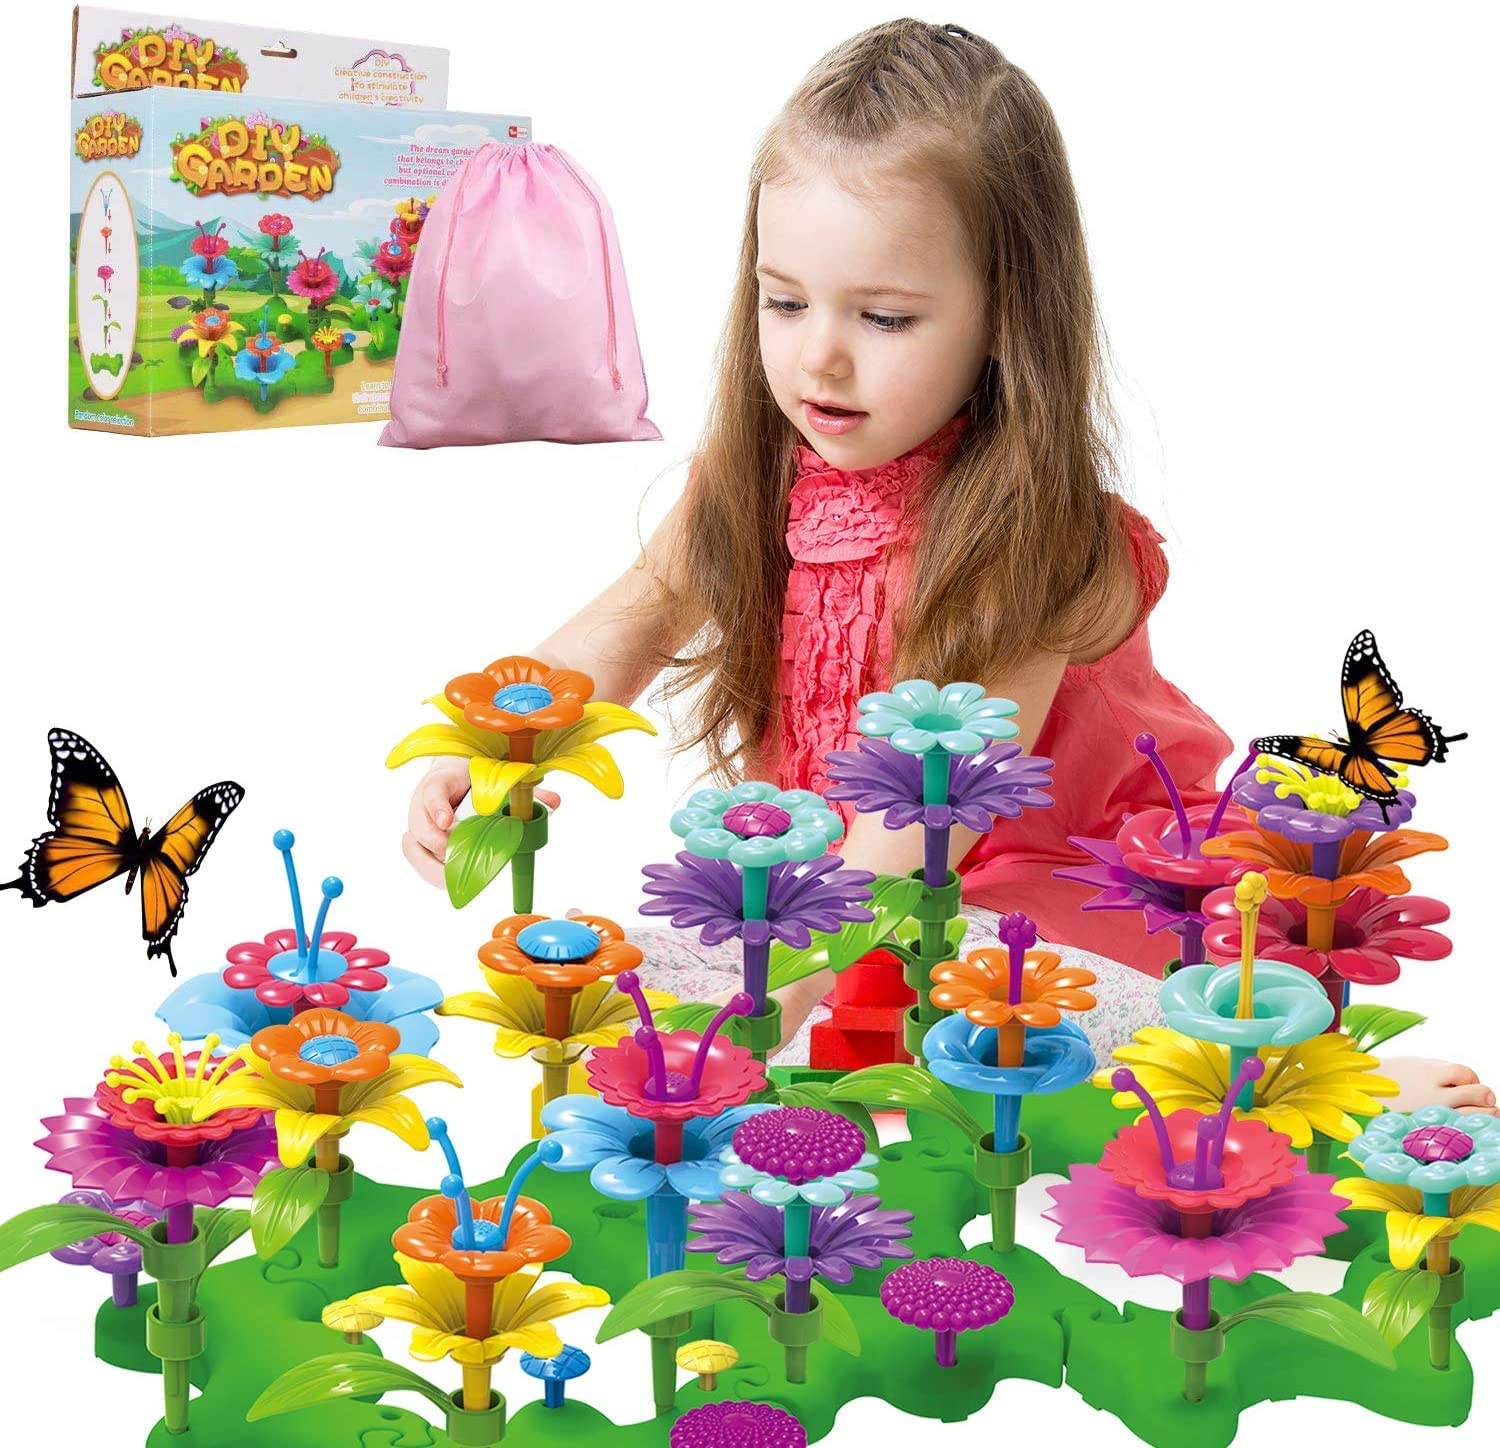 Toddler Girls Toys Gifts for 3 4 5 6 Year Olds Girls Flower Garden Building Block Toy 133 Pcs Best Gifts for 3-6 Year Old Girls Christmas Birthday Gifts Preschool Educational Stem Toys Set 